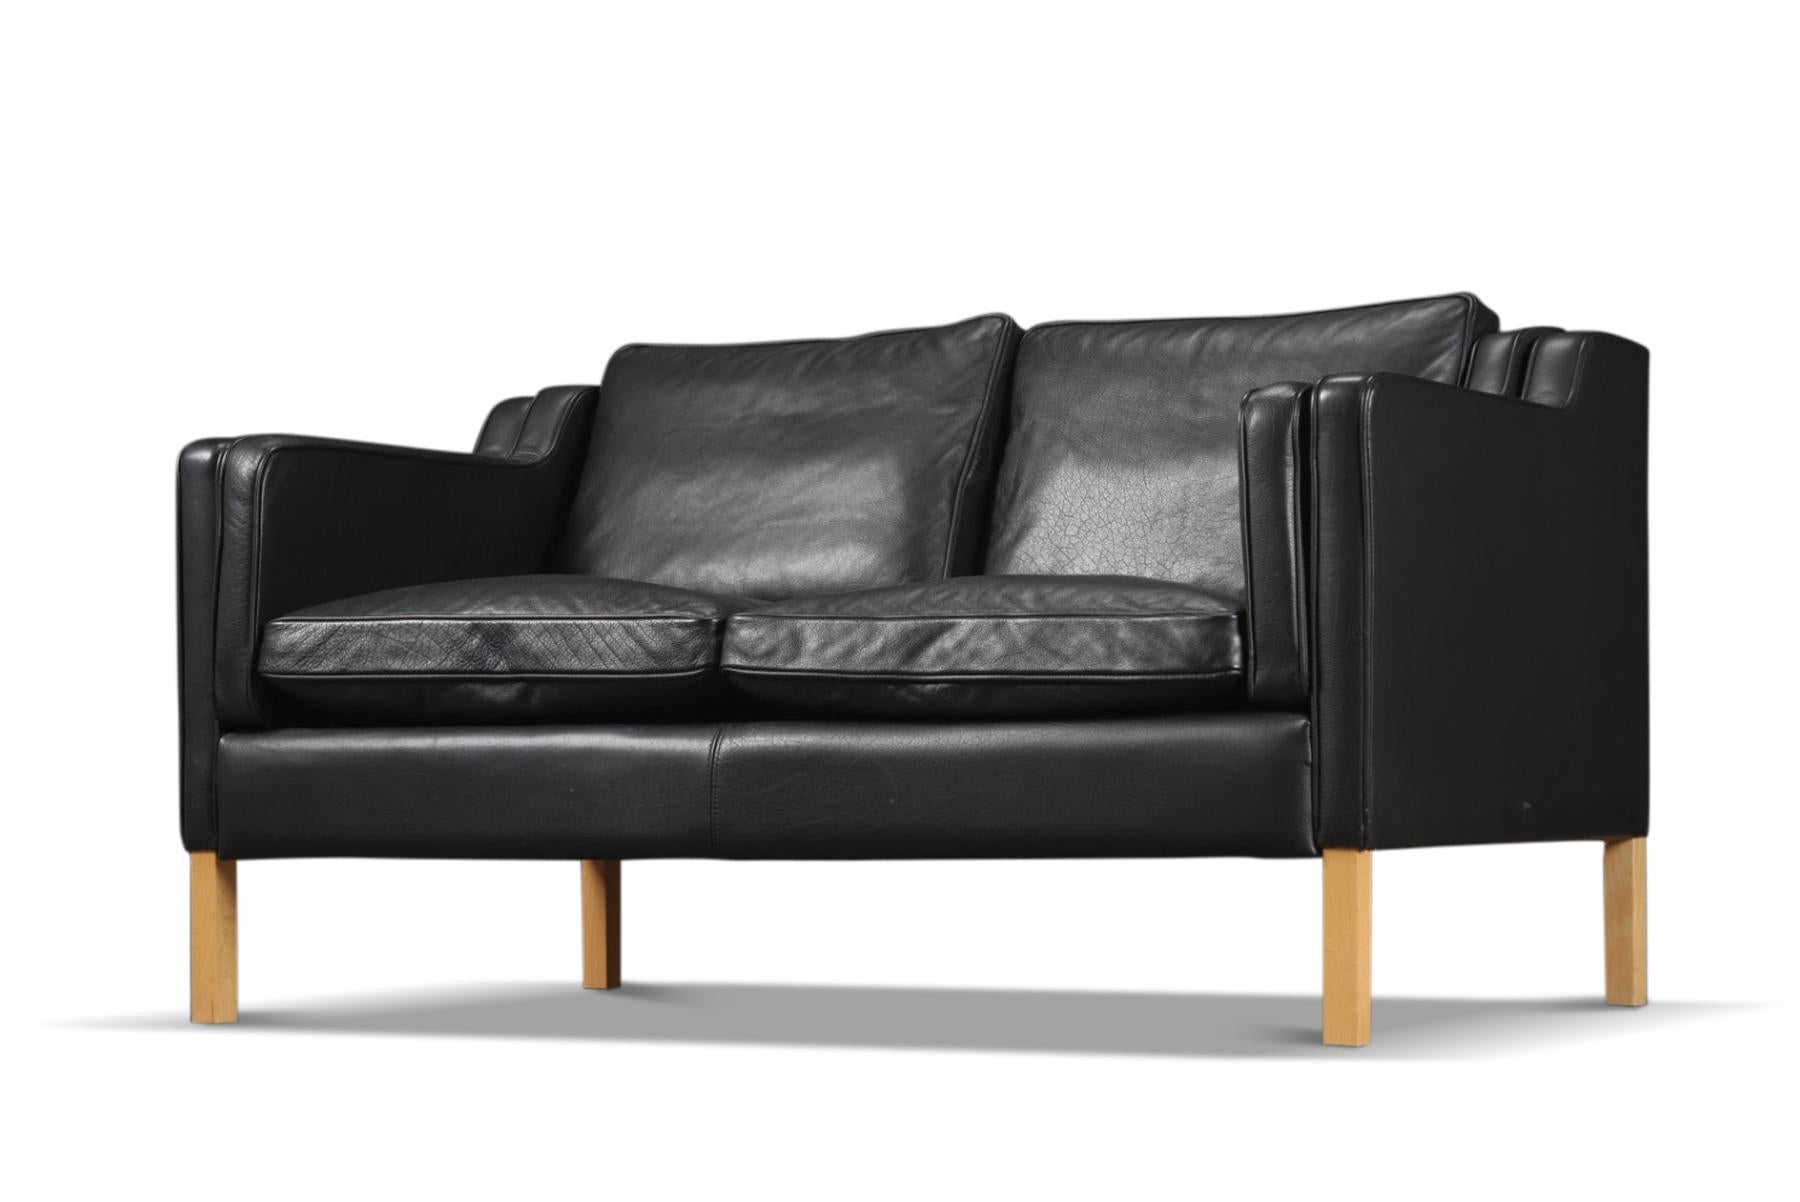 Danish Loveseat in Black Leather by Skovby In Excellent Condition For Sale In Berkeley, CA